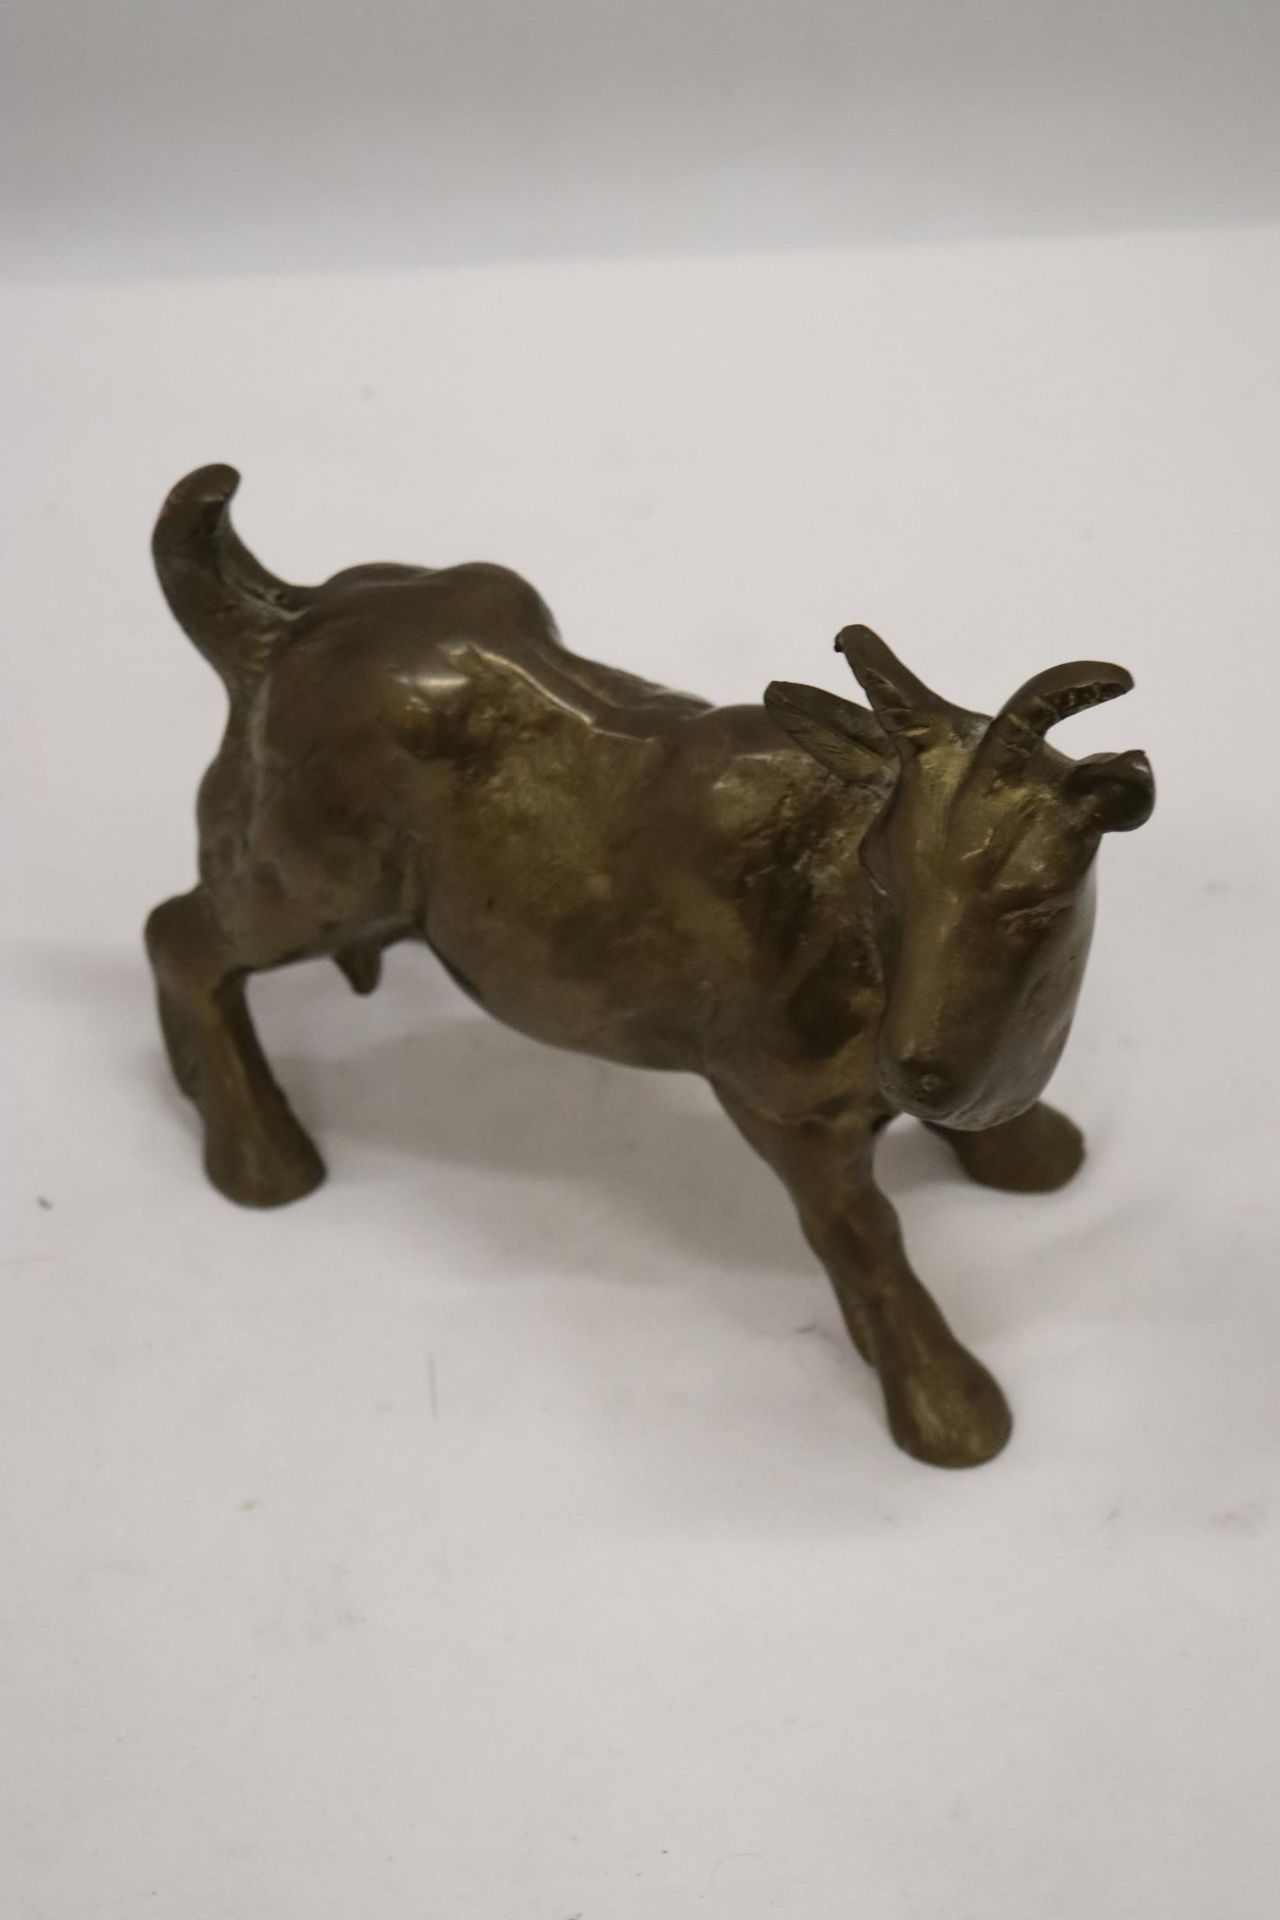 A VERY HEAVY SOLID BRASS GOAT, HEIGHT 16CM, LENGTH 18CM - Image 5 of 5